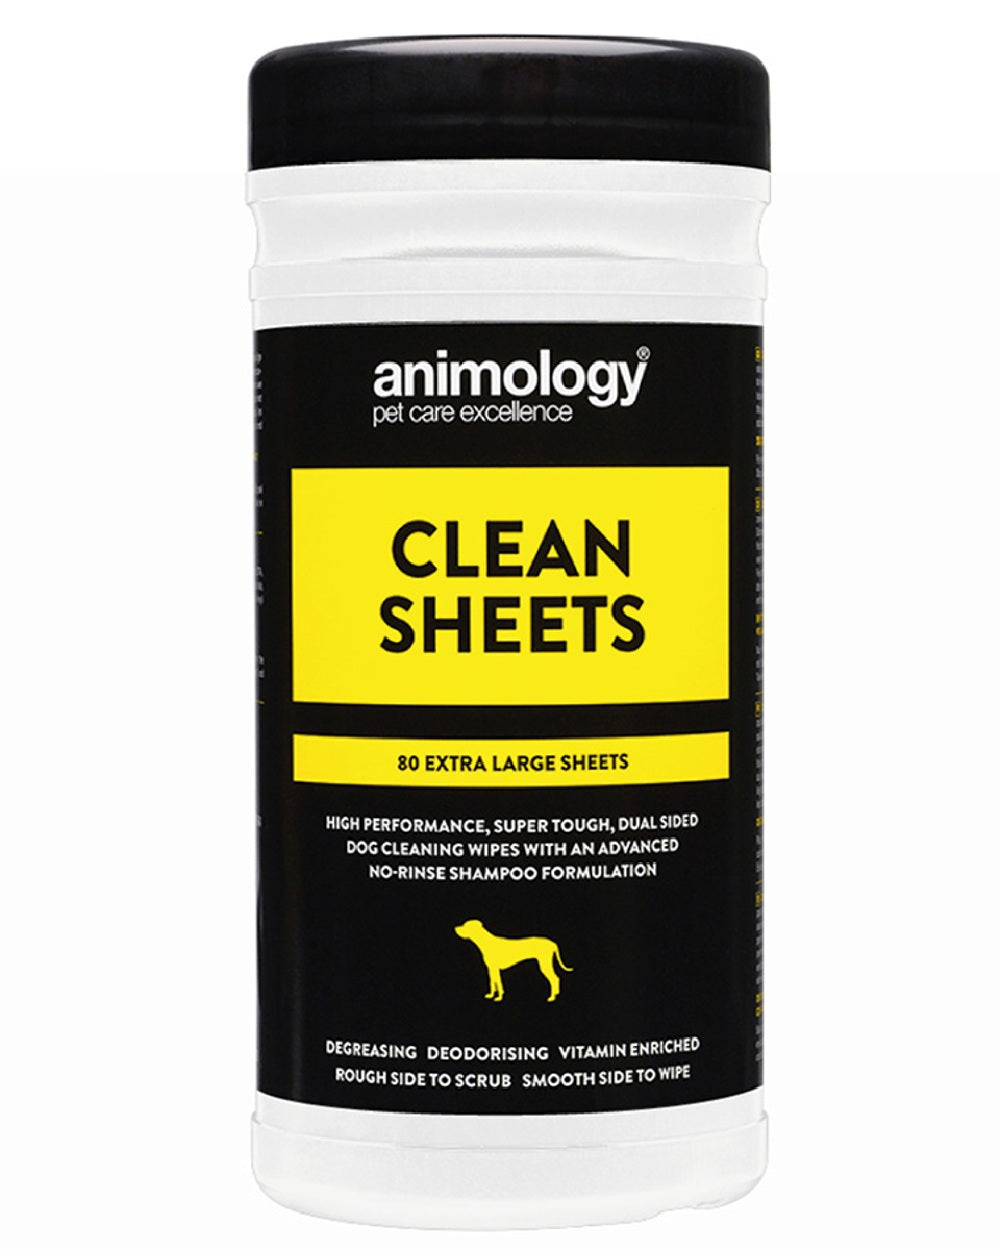 Animology Clean Sheets 80 Pack on White background